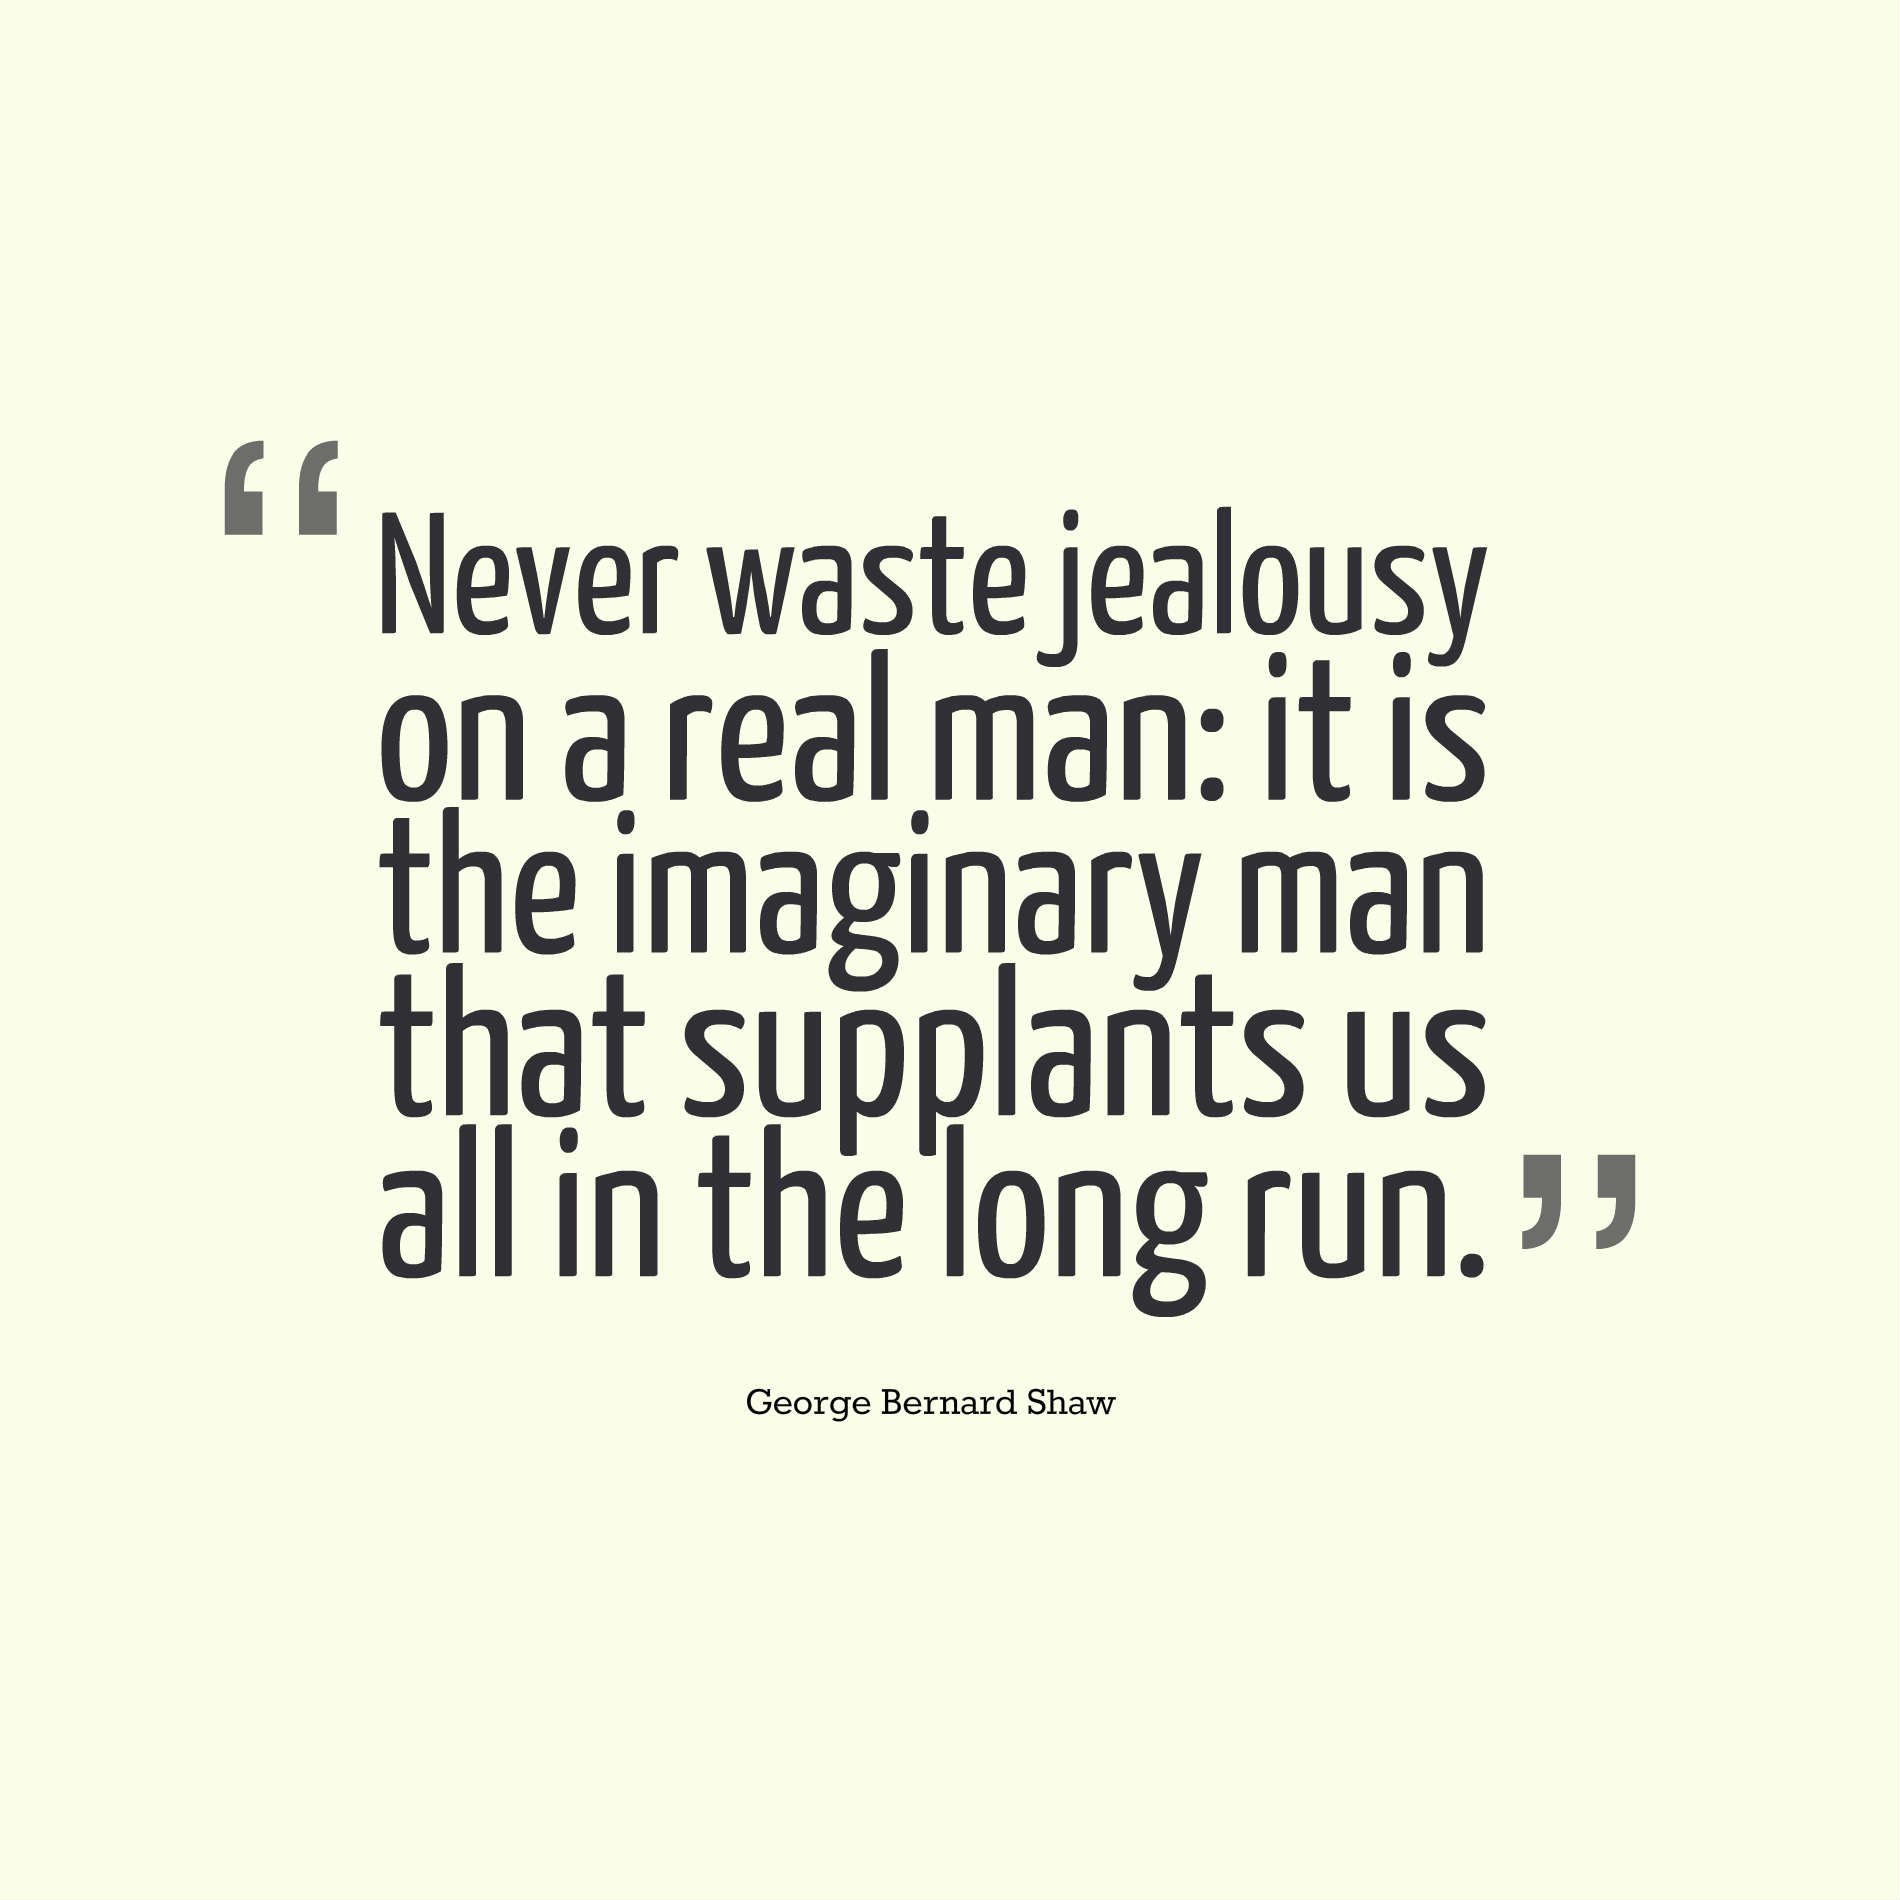 Never waste jealousy on a real man it is the imaginary man that supplants us all in the long run.